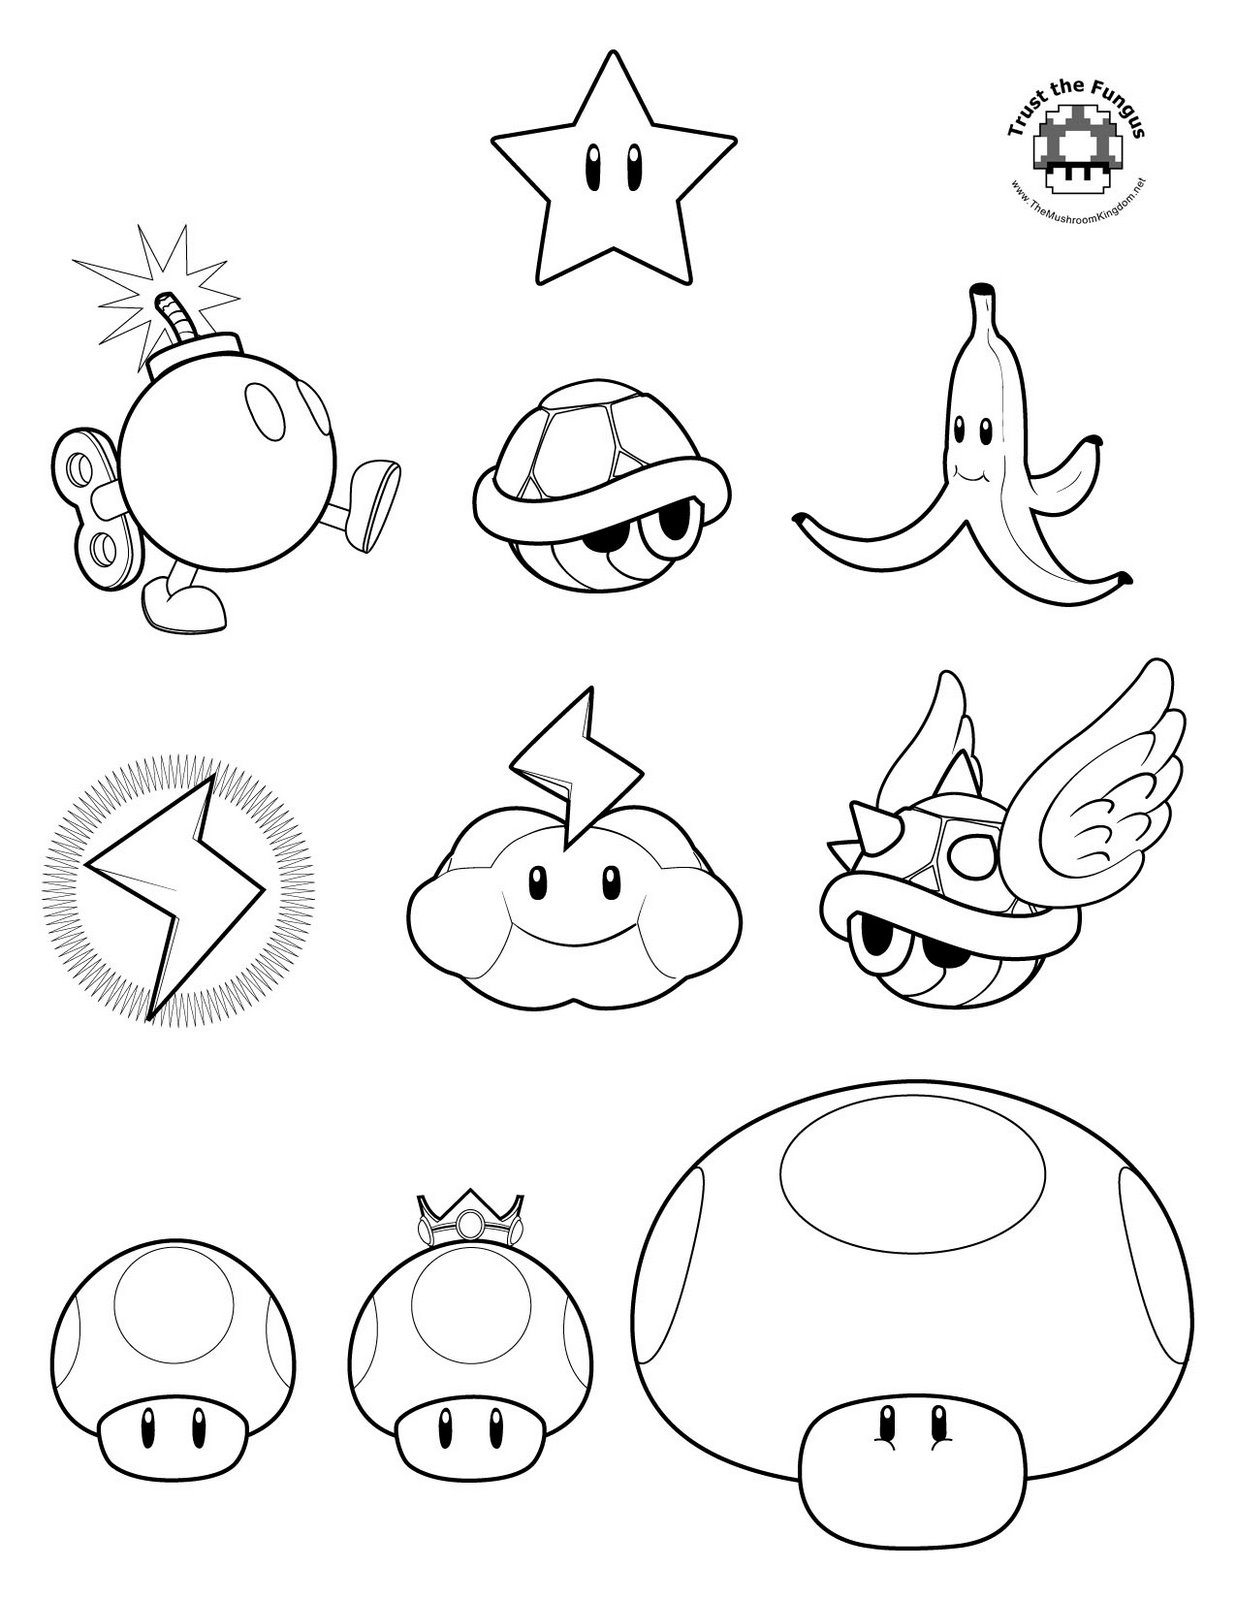  Mario coloring pages | color printing | coloring pages printable | coloring book pages | #3